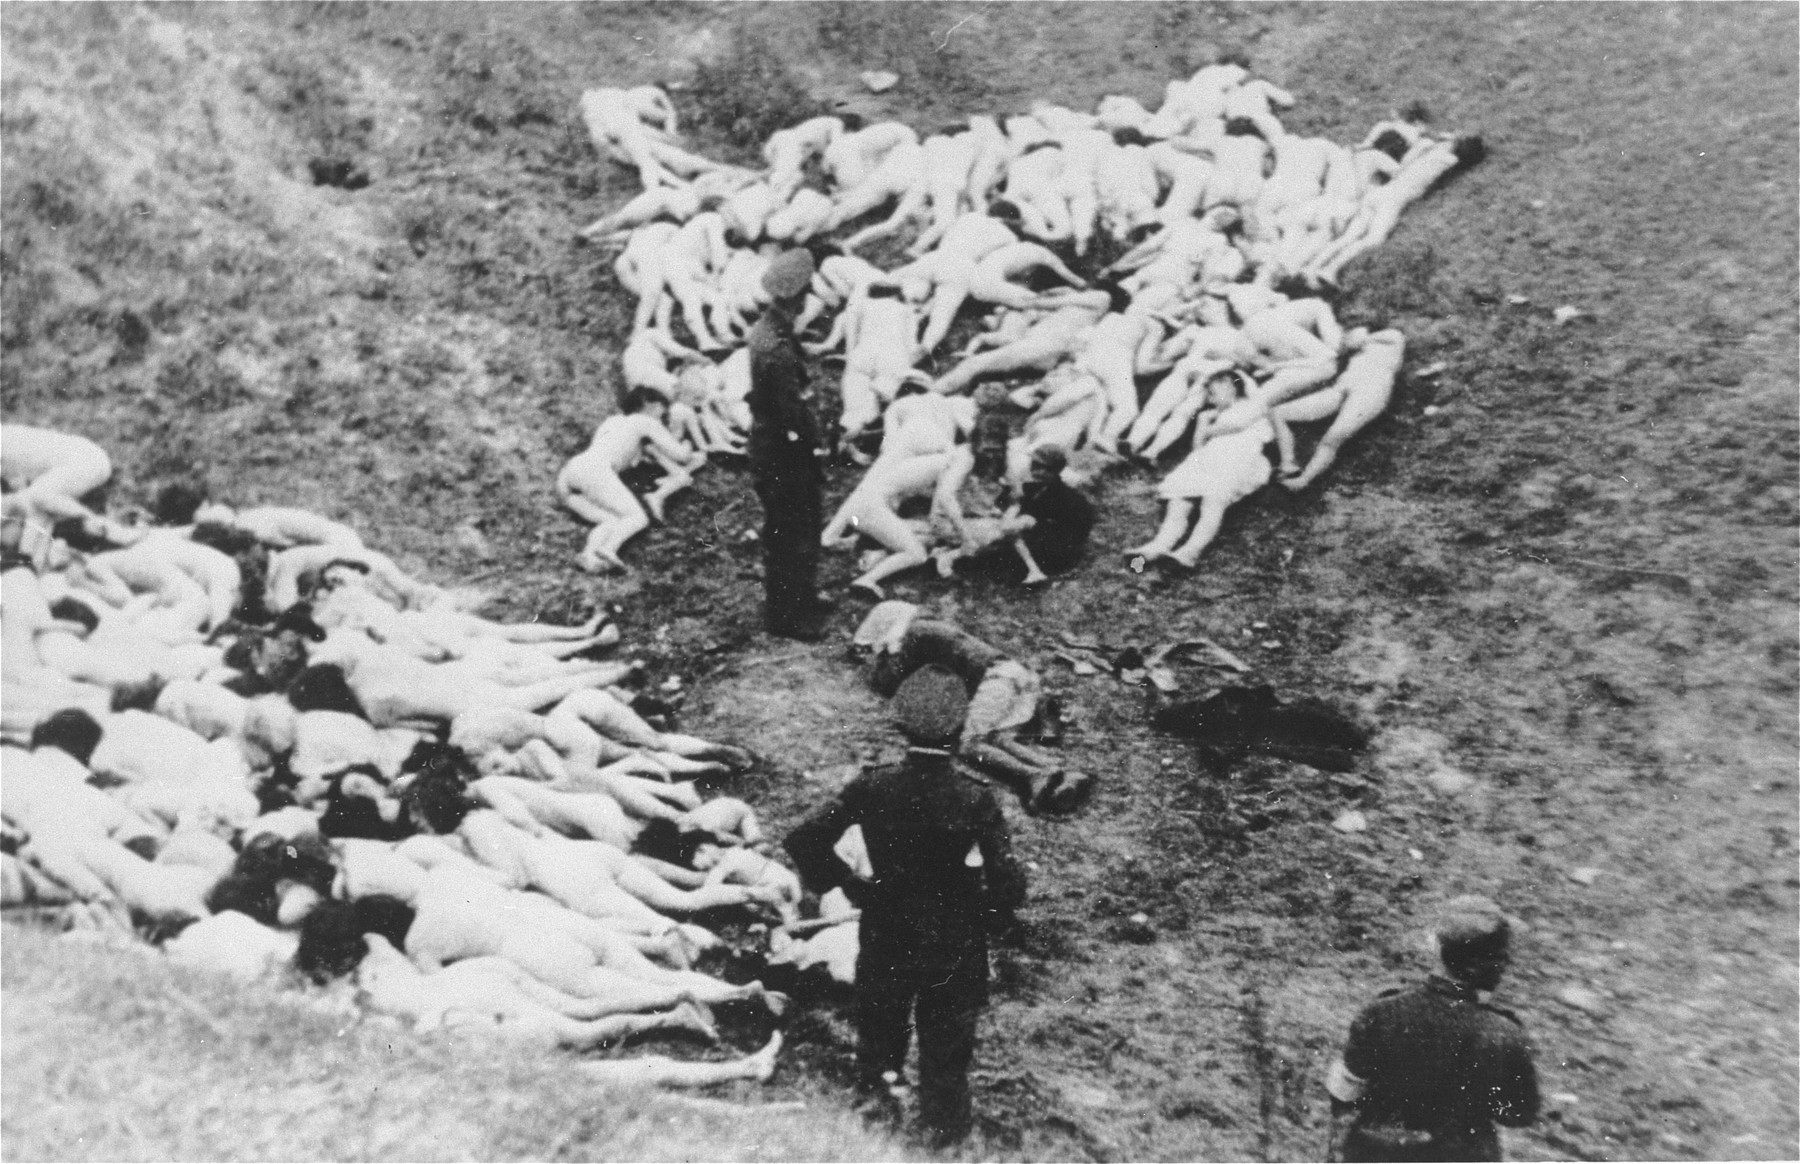 A German policeman prepares to complete a mass execution by shooting two Jewish children, who were shot with the others in connection with the liquidation of the Mizocz ghetto.

According to the Zentrale Stelle in Germany (Zst. II 204 AR 1218/70), these Jews were collected by the German Gendarmerie and Ukrainian Schutzmannschaft during the liquidation of the Mizocz ghetto, which held roughly 1,700 Jews.  On the eve of the ghetto's liquidation (13 October 1942), some of the inhabitants rose up against the Germans and were defeated after a short battle.  The remaining members of the community were transported from the ghetto to this ravine in the Sdolbunov Gebietskommissariat, south of Rovno, where they were executed.  Information regarding this action, including the photos, were acquired from a man named Hille, who was the Bezirks-Oberwachtmeister of the Gendarmerie at the time.  Hille apparently gave the five photos (there were originally seven) to the company lawyer of a textile firm in Kunert, Czechoslovakia, where he worked as a doorman after the war.  The Czech government confiscated the photos from the lawyer in 1946 and they subsequently became public.  That the photos indeed show the shooting of Jews in connection with the liquidation of the ghetto was also confirmed by a statement of Gendarmerie-Gebietsfuehrer Josef Paur in 1961.